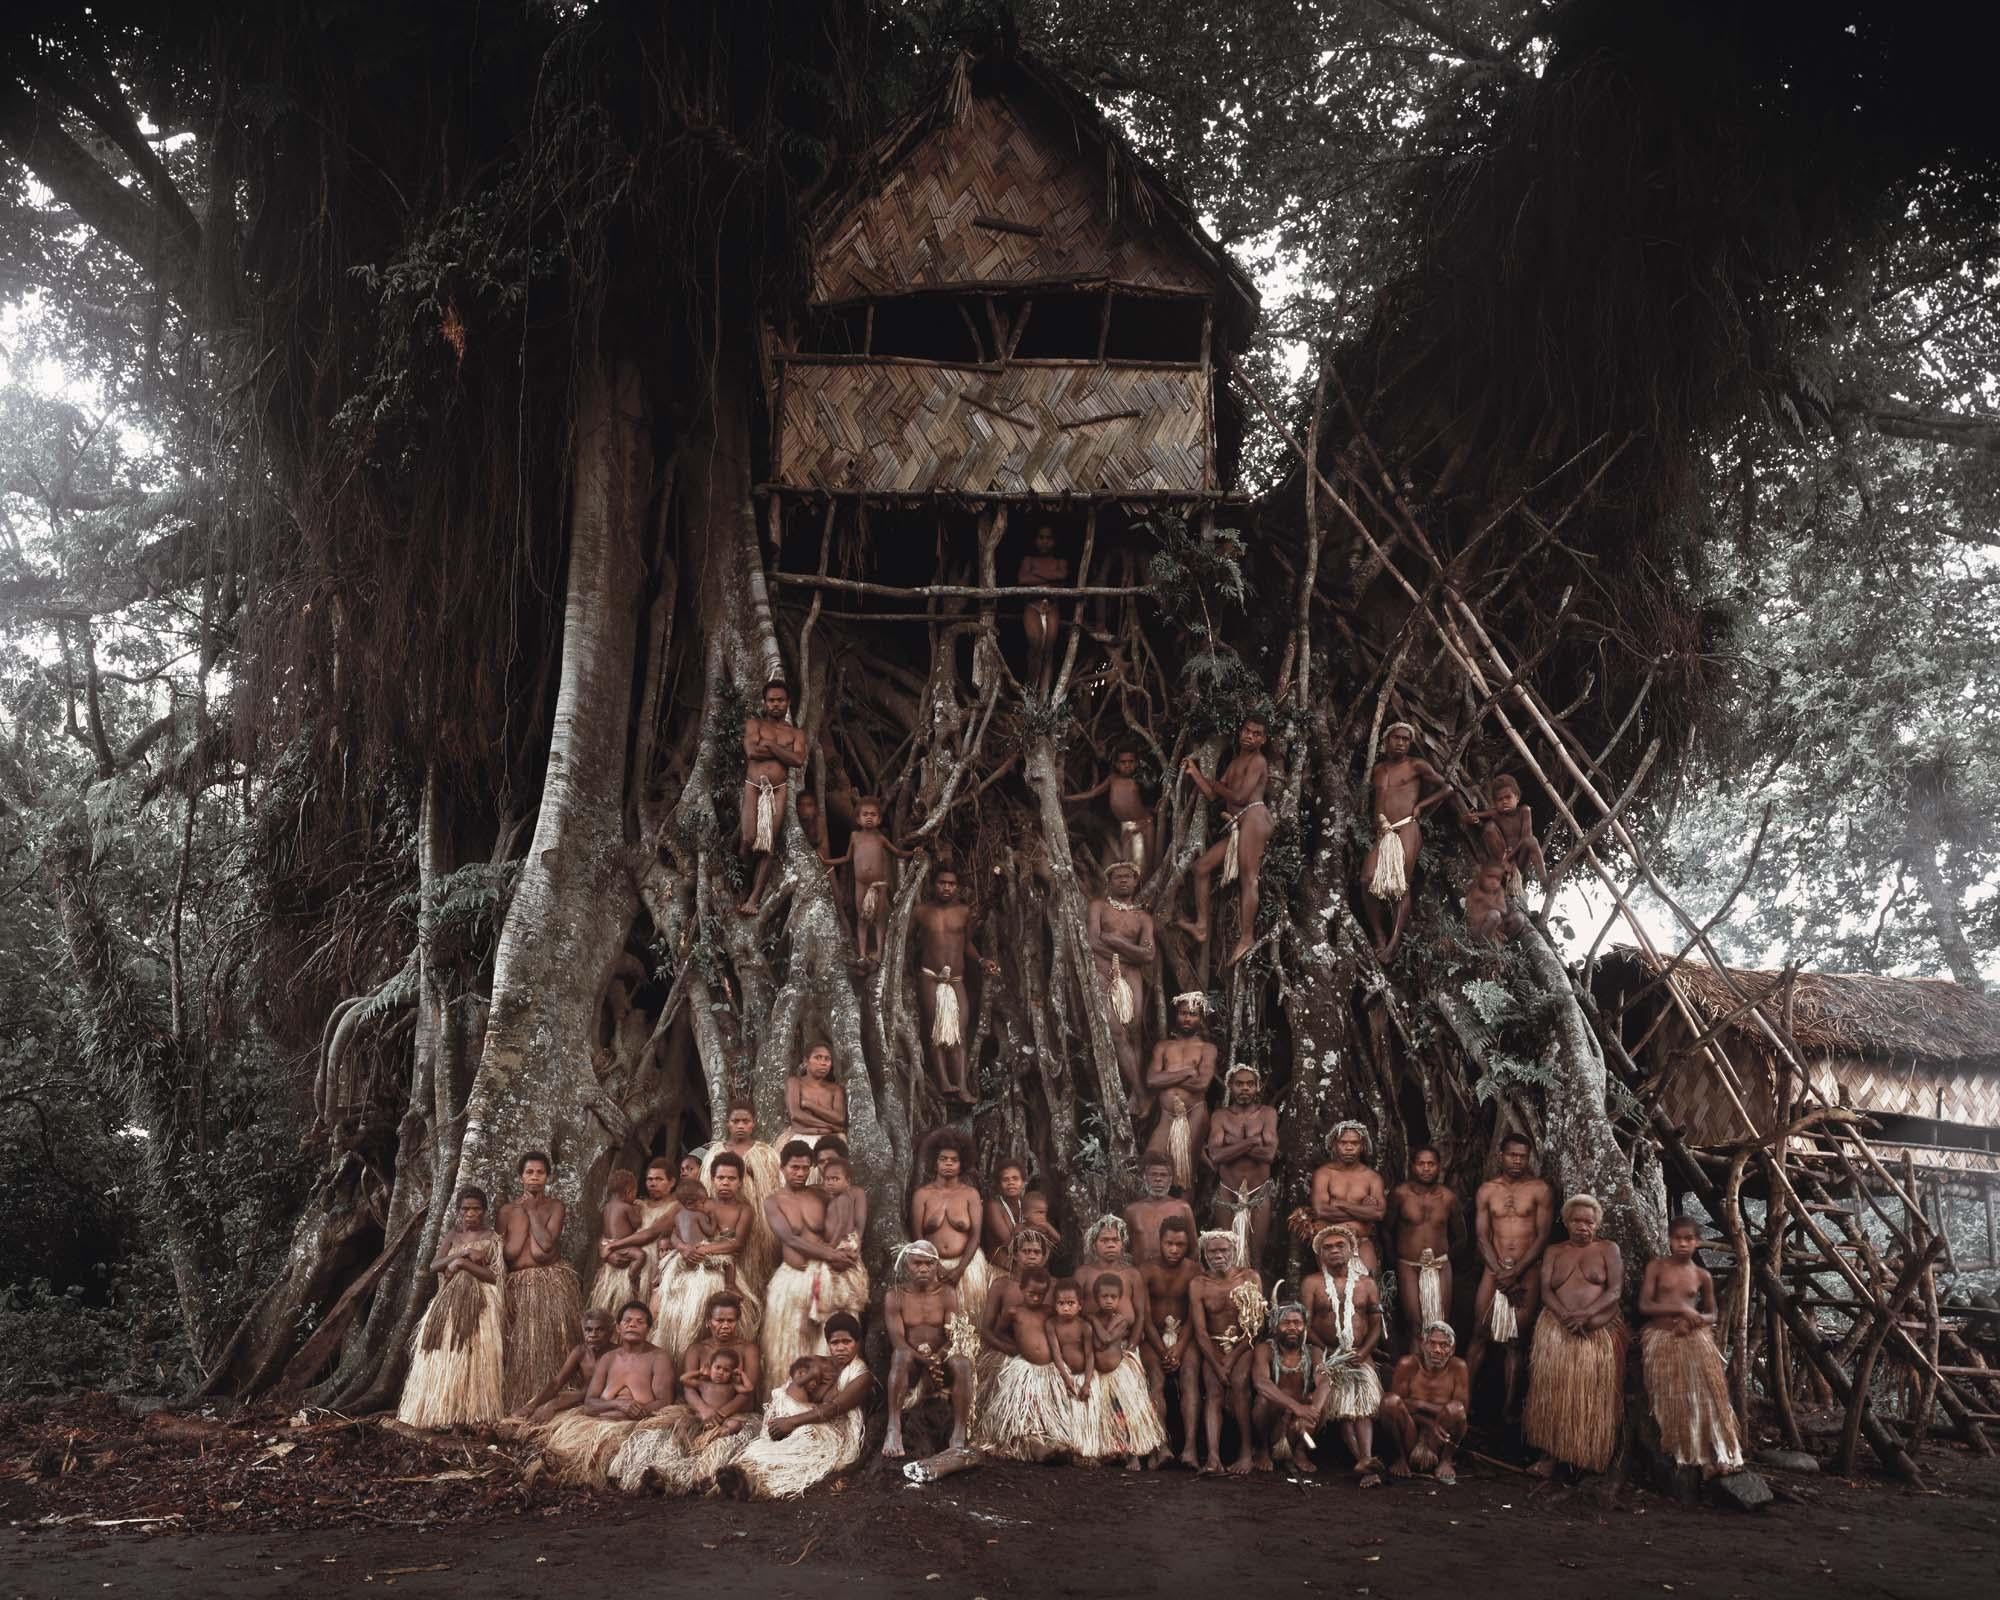 "XXI 478 - Ni Yakal Villagers, Yakel, Tanna Island - Vanuatu Islands, 2014

Settlement on the 85 Vanuatu islands dates back to around 500 BC. There is evidence that Melanesian navigators from Papua New Guinea were the first to colonise Vanuatu. Over